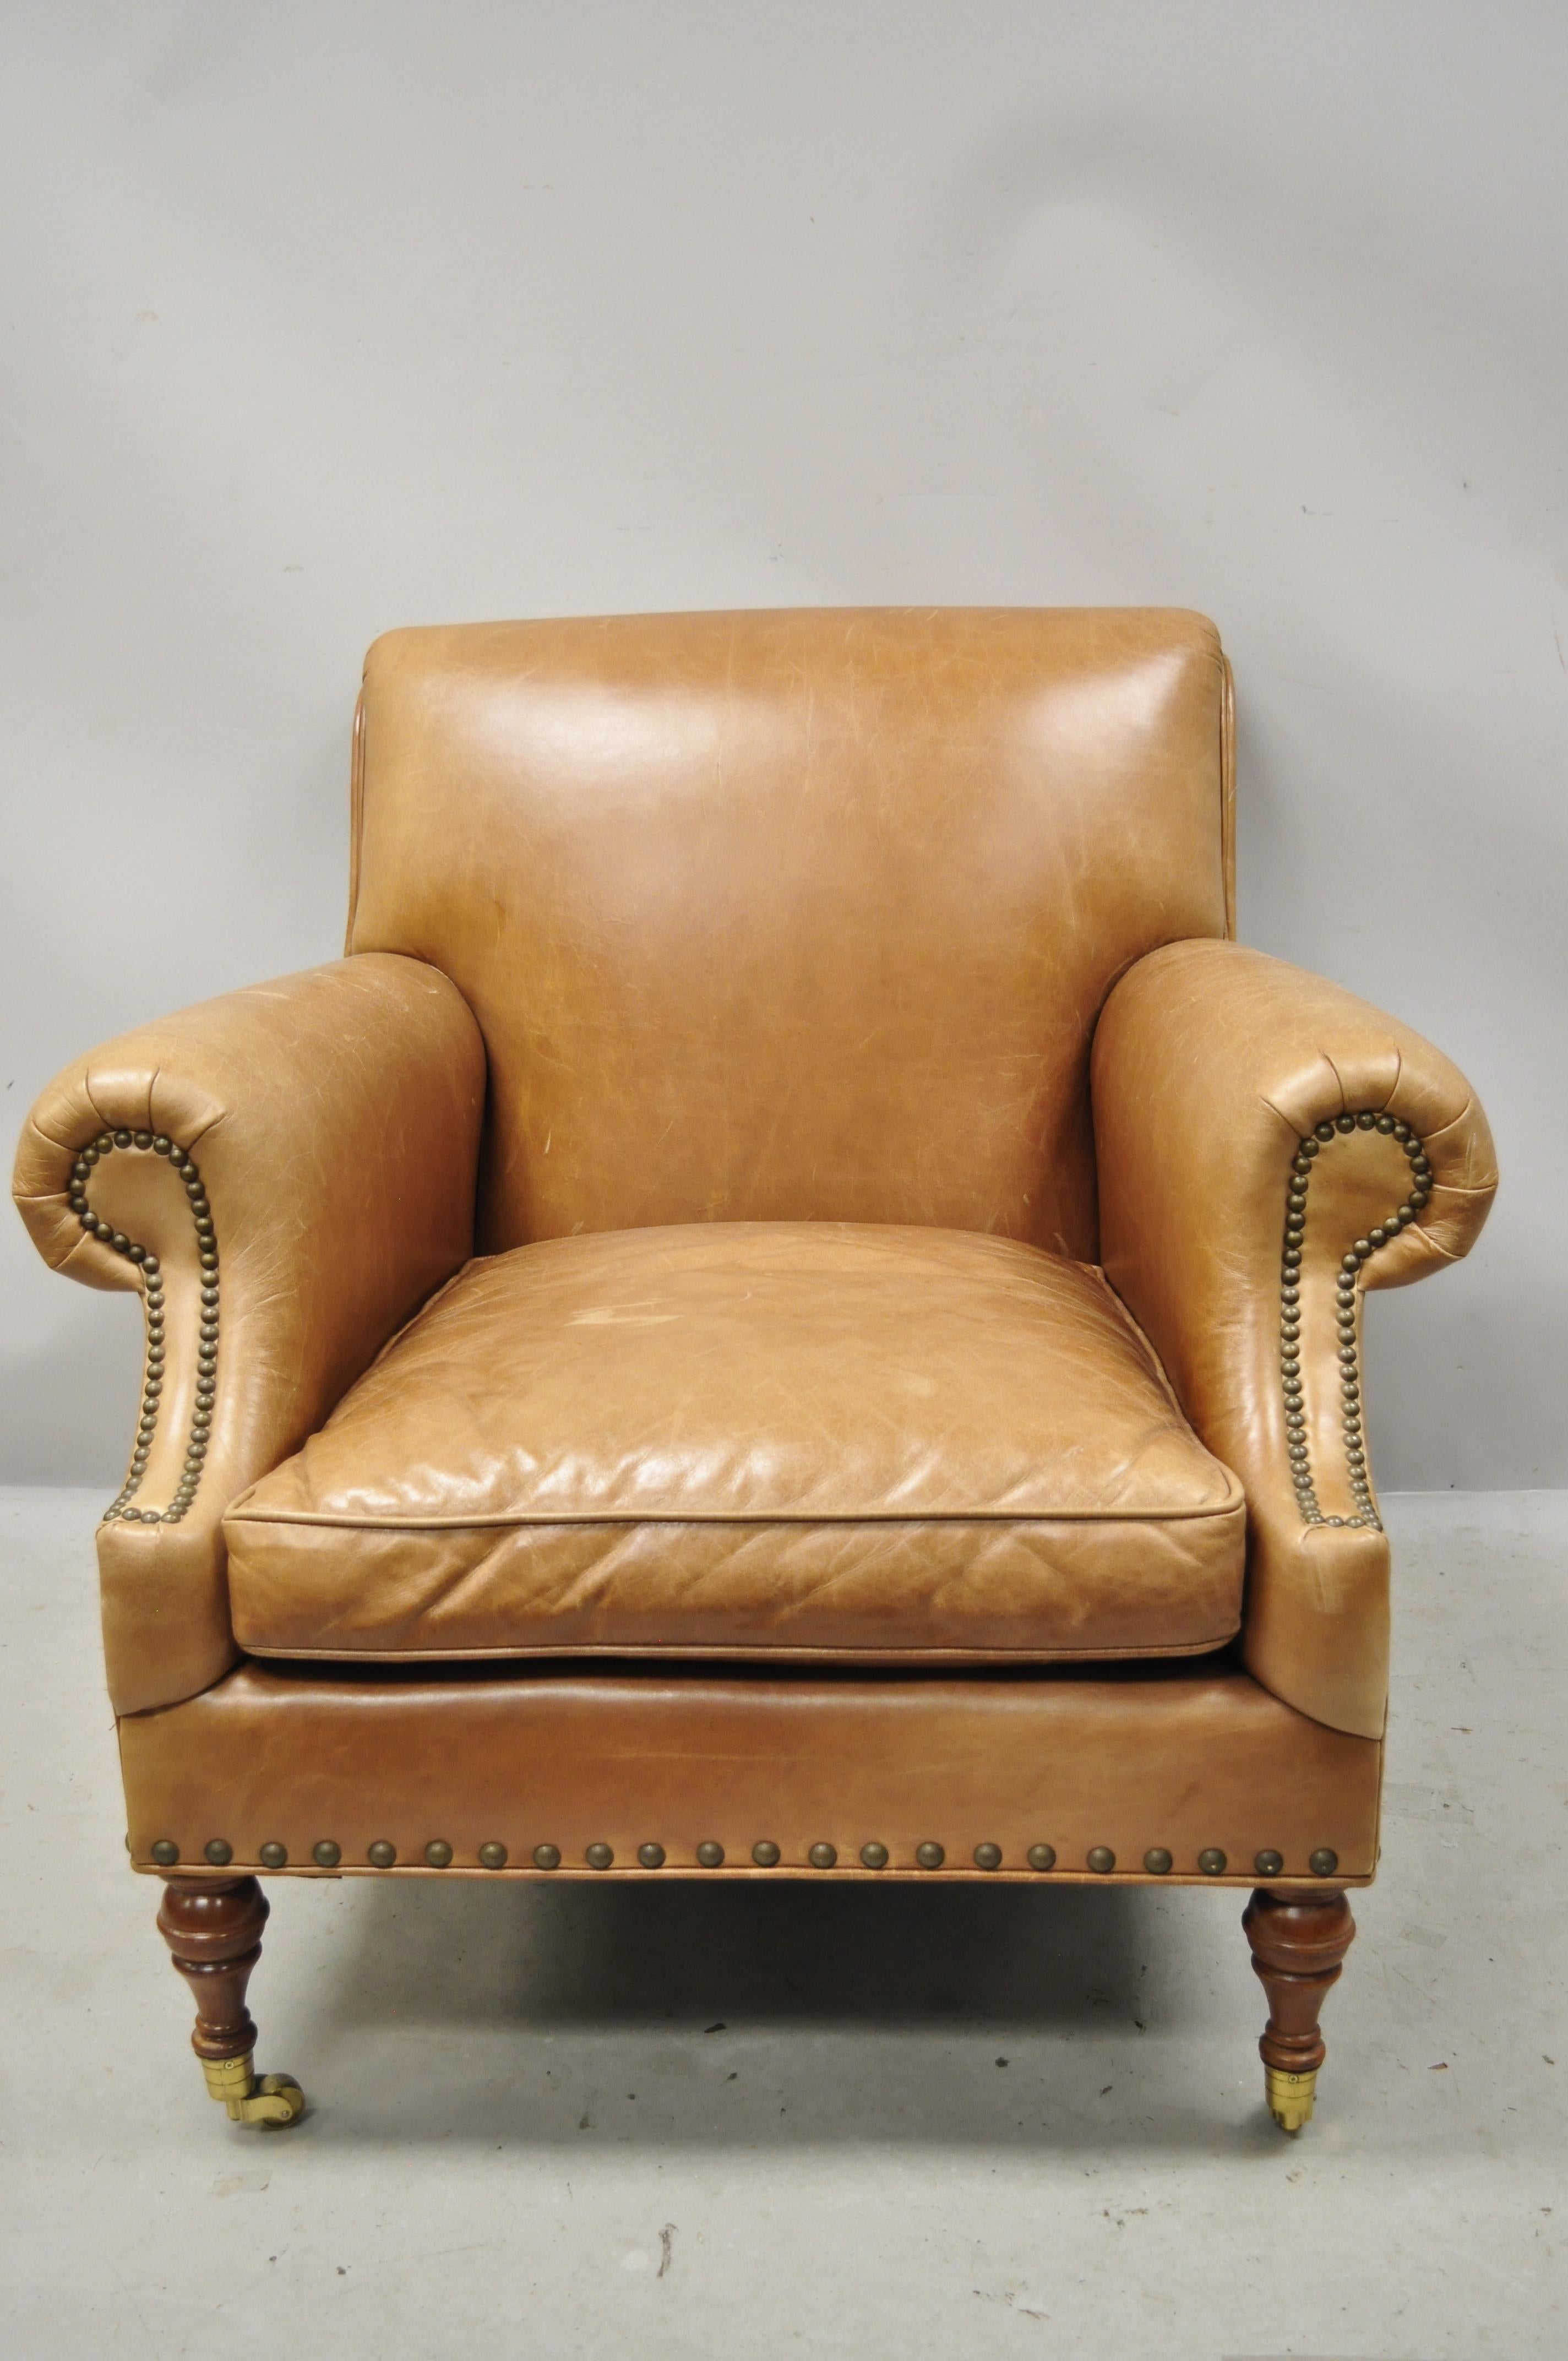 20th century McKinley leather English Regency cigar camel leather club lounge chair and ottoman. Item features brown/tan camel leather upholstery, nailhead trim, rolled arms and back, brass rolling casters, solid wood construction, original label,